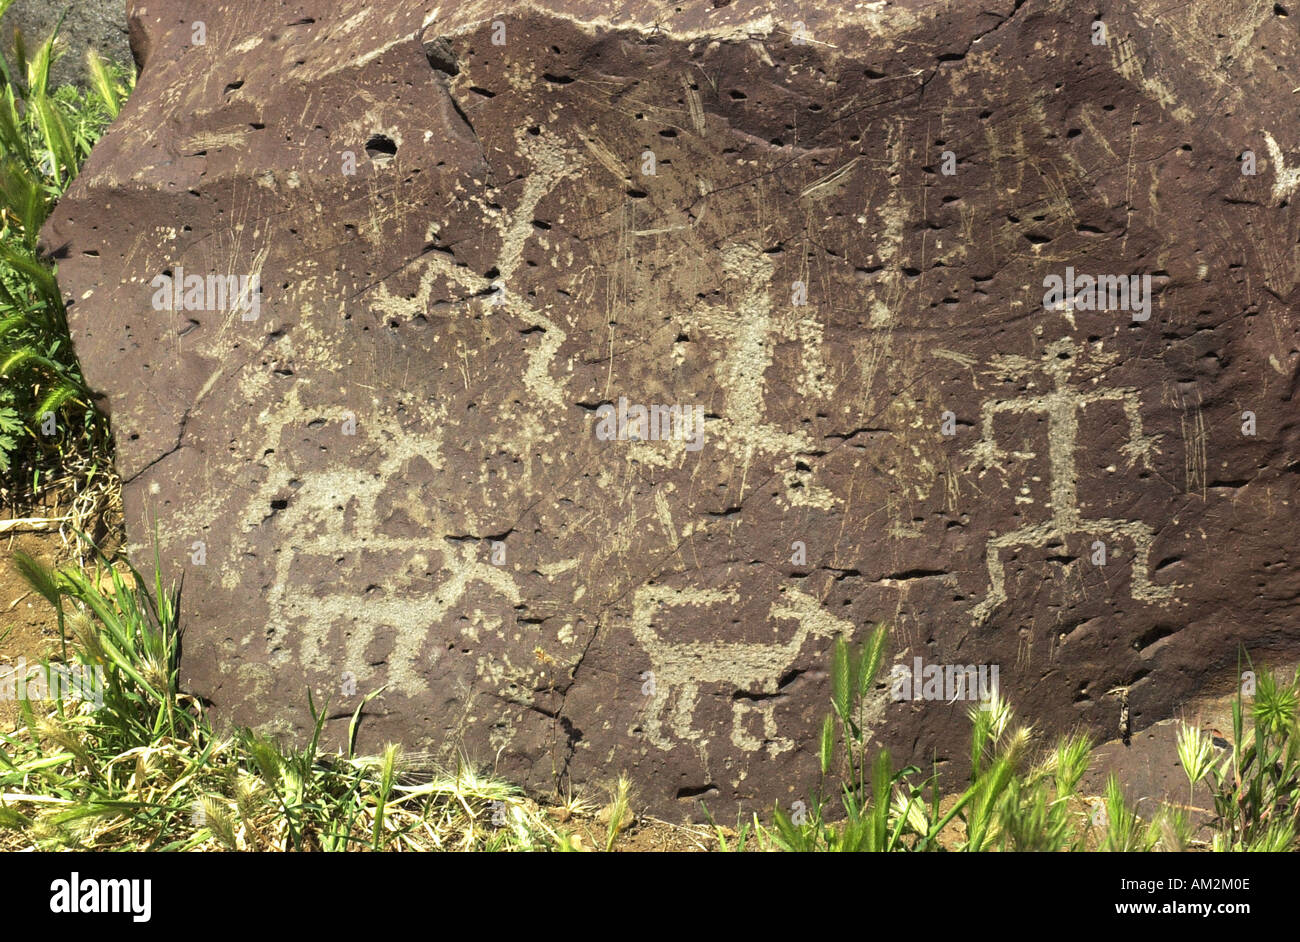 Petroglyph carvings of animal figures on a rock by the Salt River Arizona. Digital photograph Stock Photo